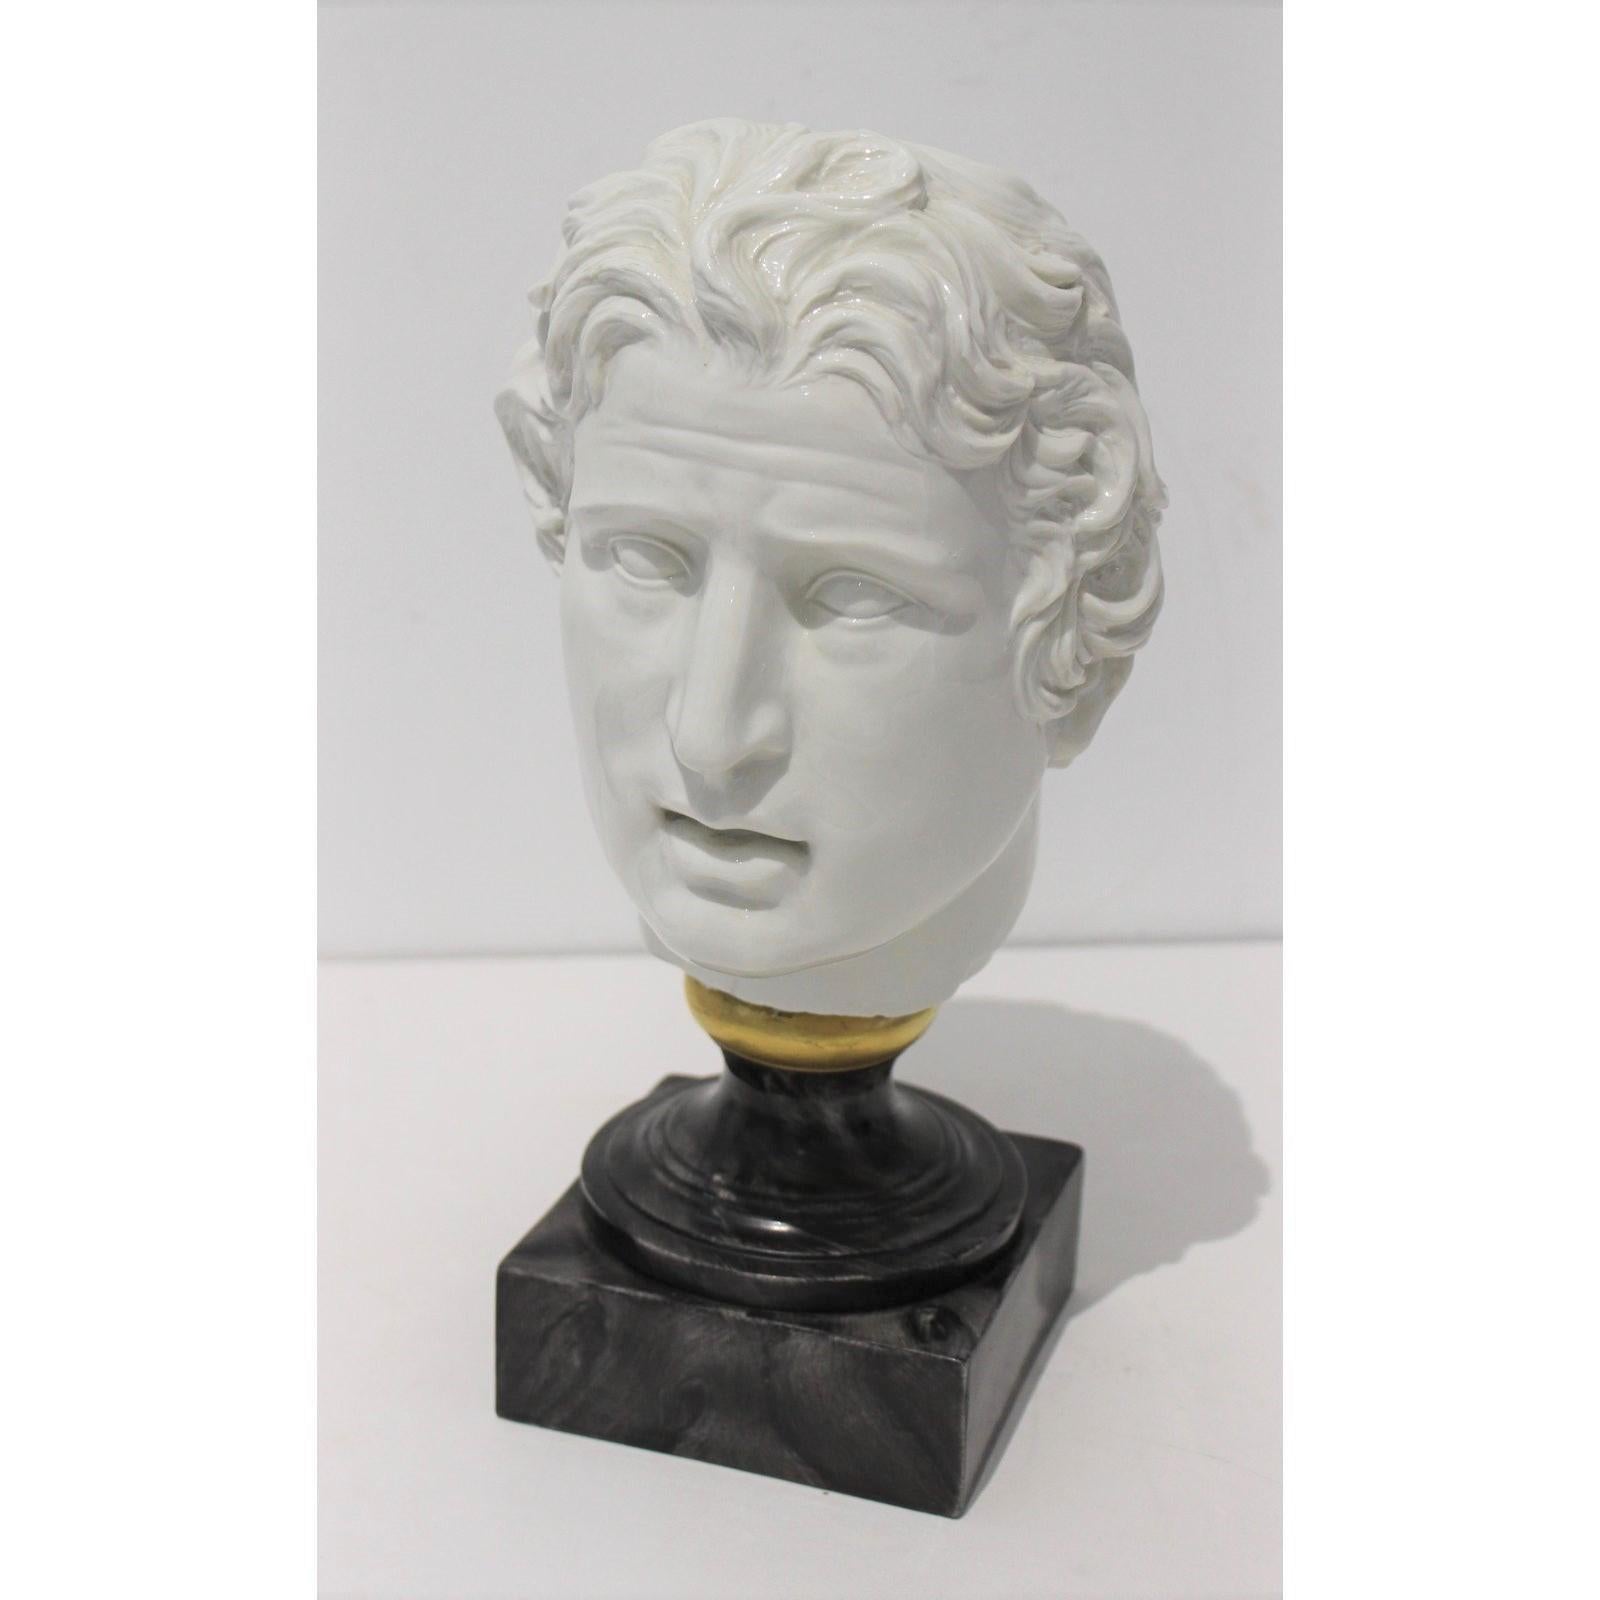 Evocative Mid-Century Modern Roman Head of male in white porcelain on faux malachite stand from a Palm Beach estate.

Square base measures 4 1/2 x 4 1/2 x 1 3/4 high.